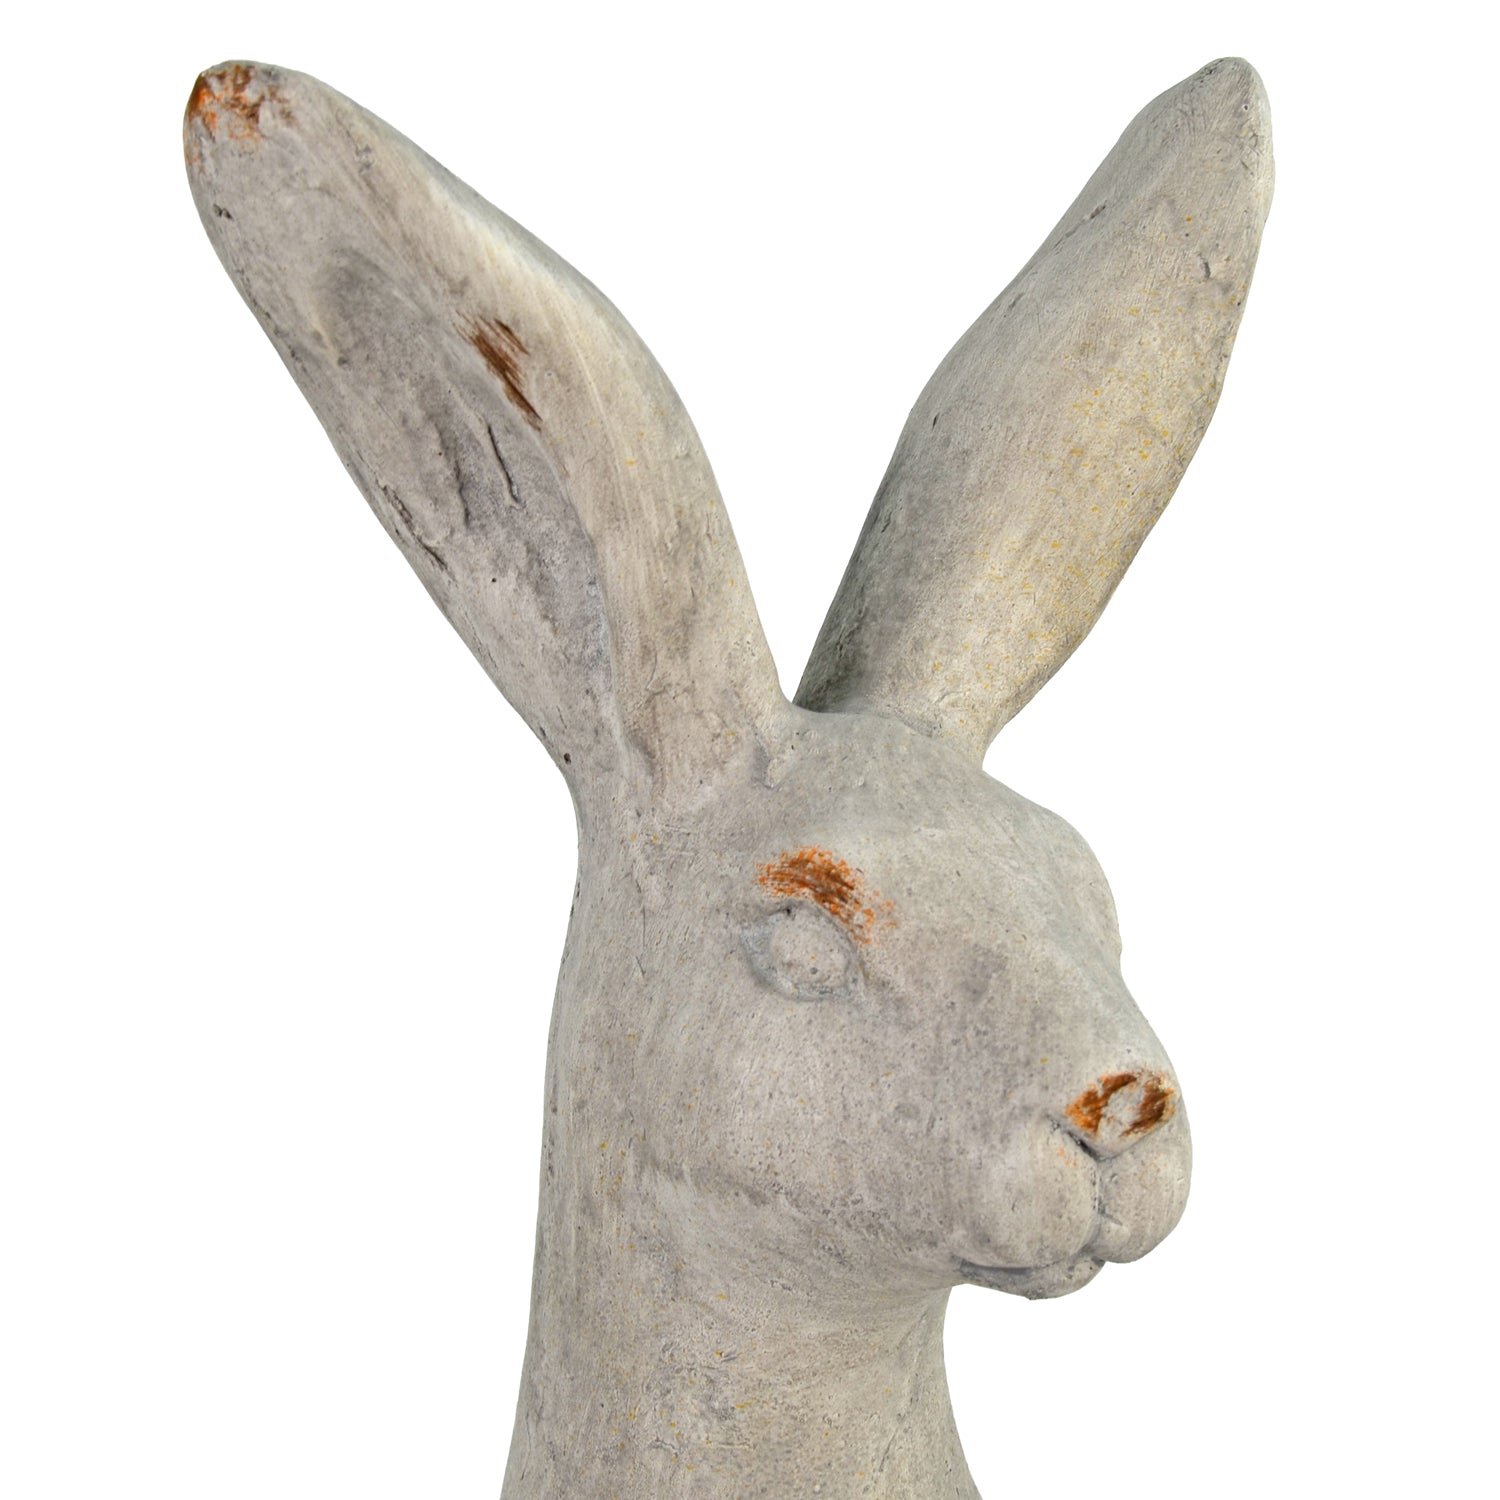 Solstice Sculptures Hare Sitting 61cm Weathered Stone Effect Statues Solstice Sculptures   